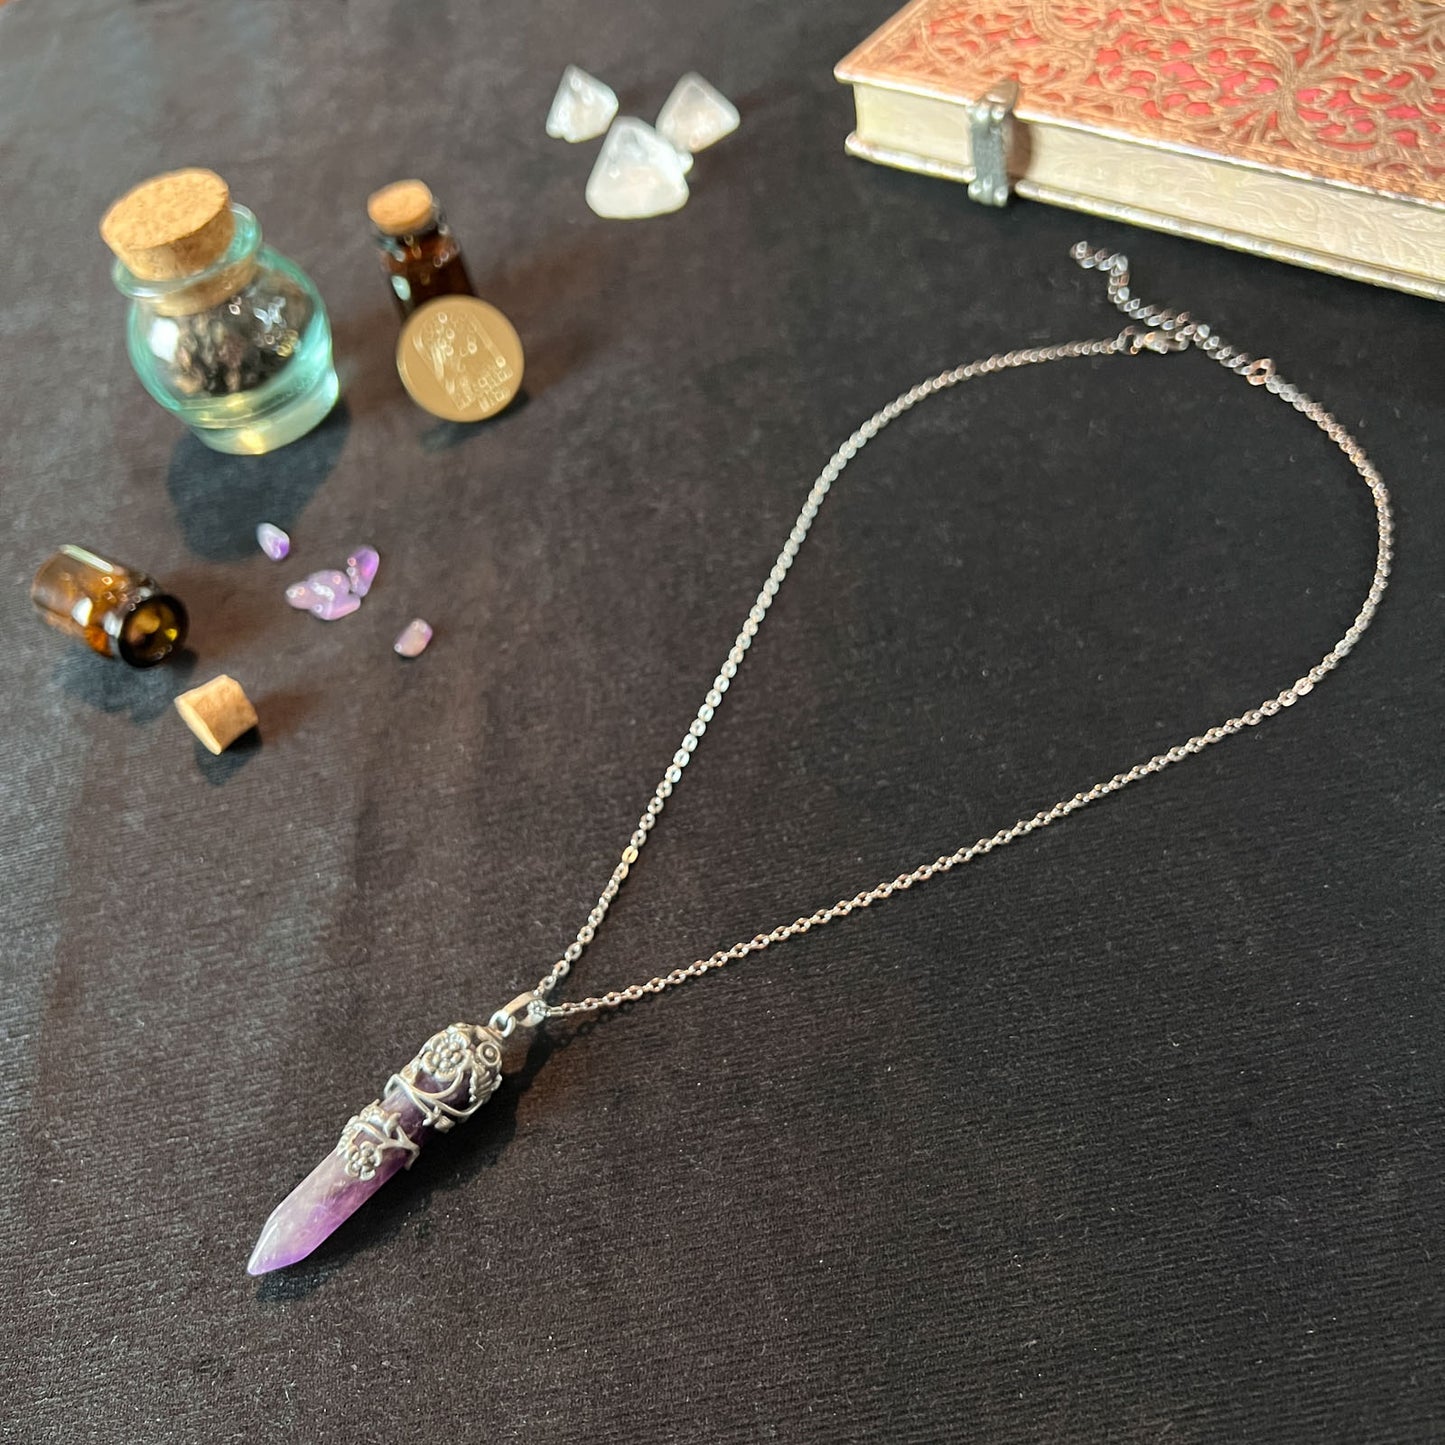 Gemstone floral necklace amethyst pendant witchy jewelry necklace pagan gothic pendant